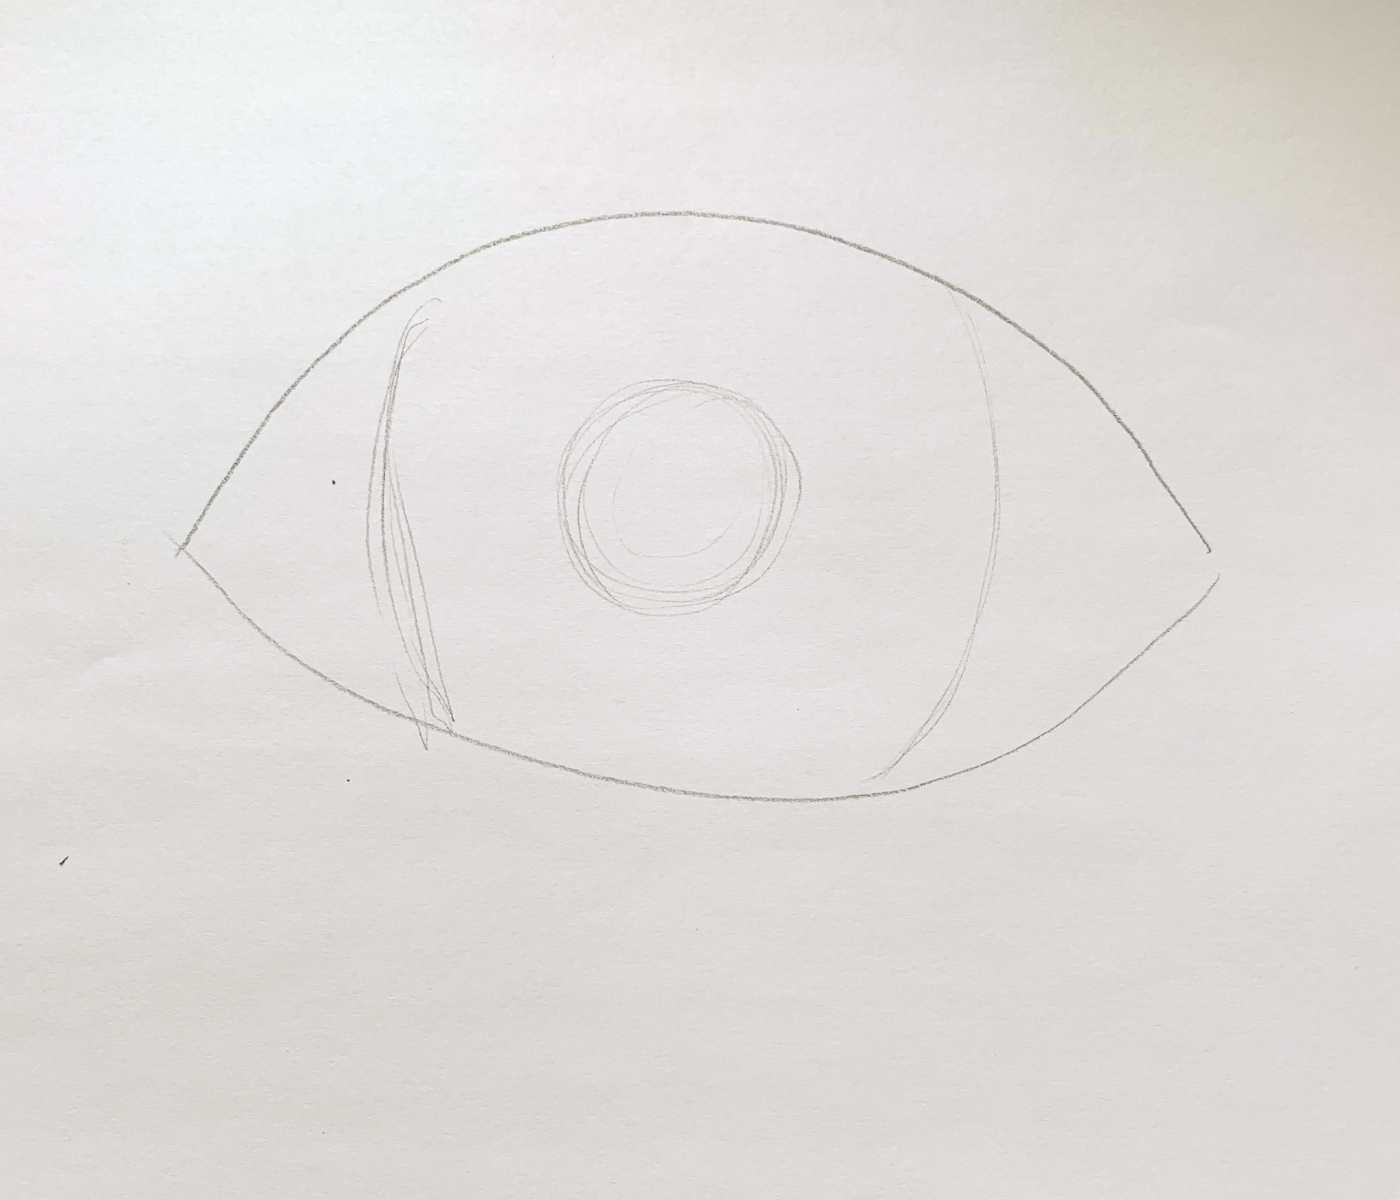 Outline of an eye hand drawn